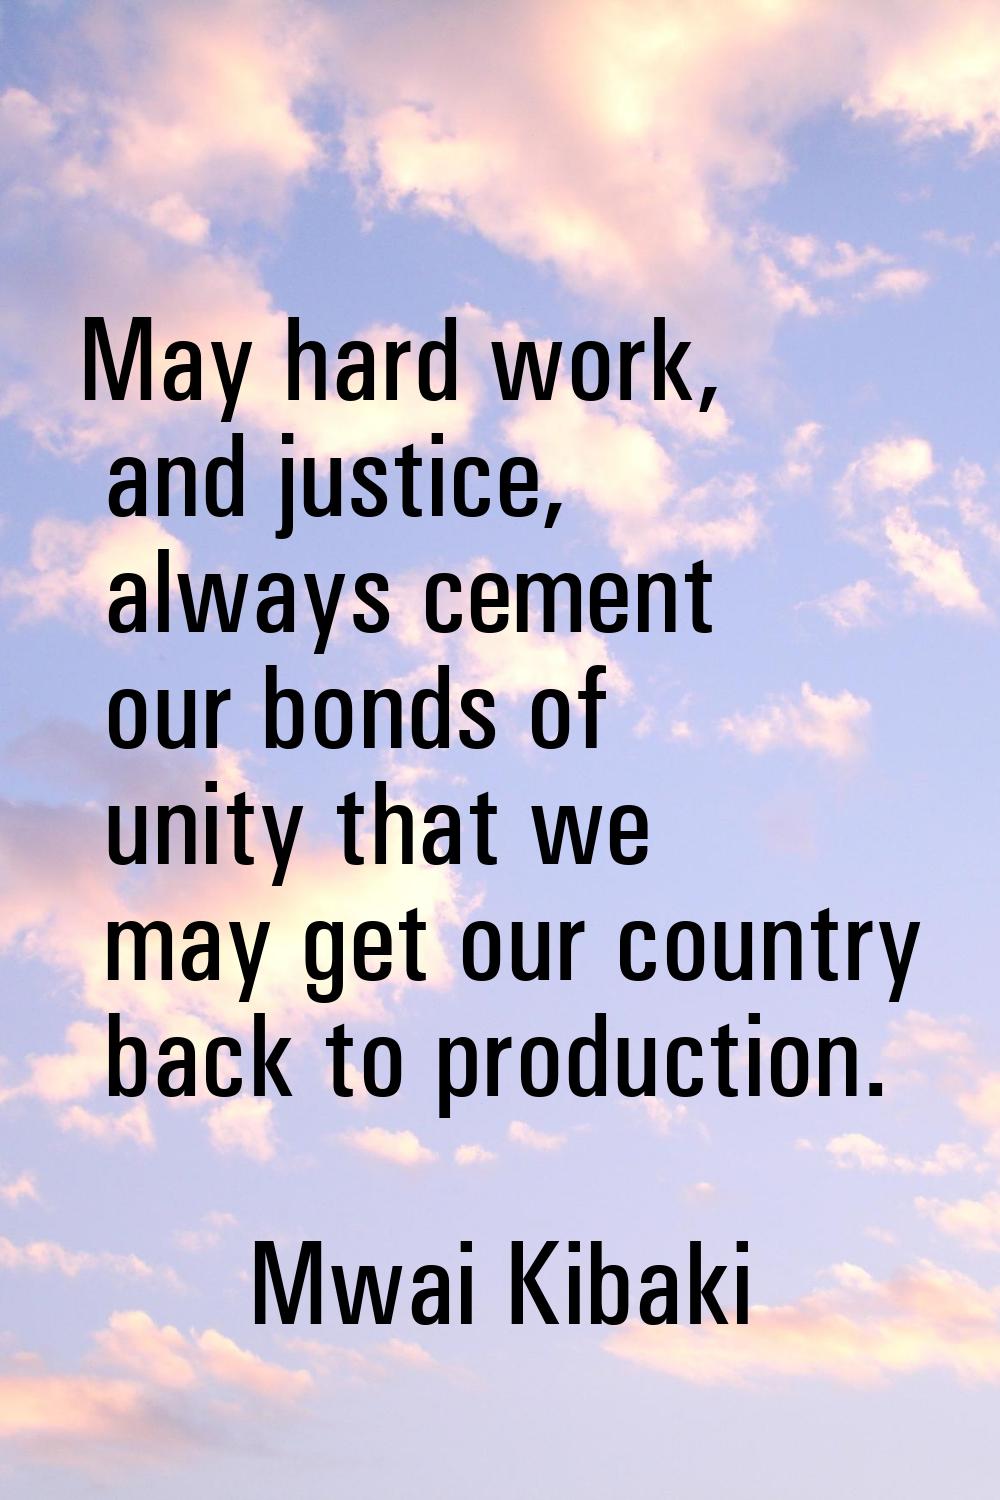 May hard work, and justice, always cement our bonds of unity that we may get our country back to pr